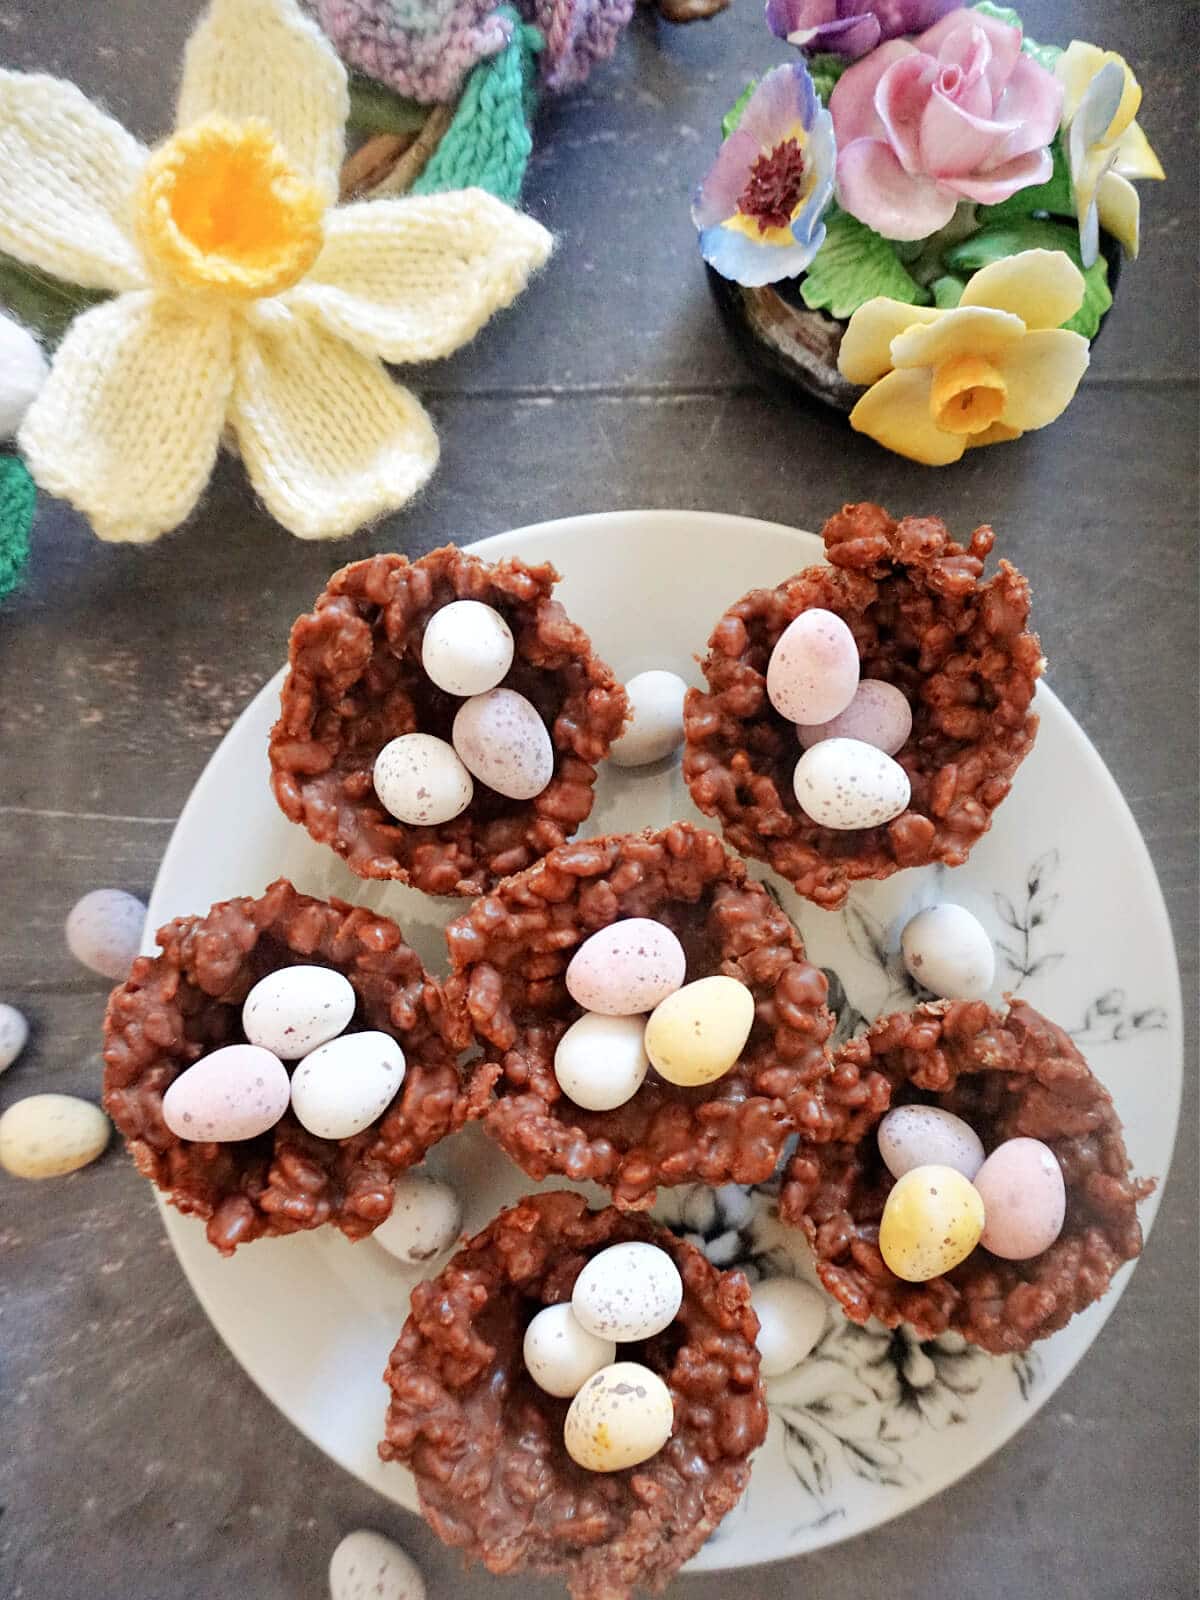 Overhead shot of a white plate with 6 chocolate rice krispie nests filled with mini chocolate eggs and decorations on the side